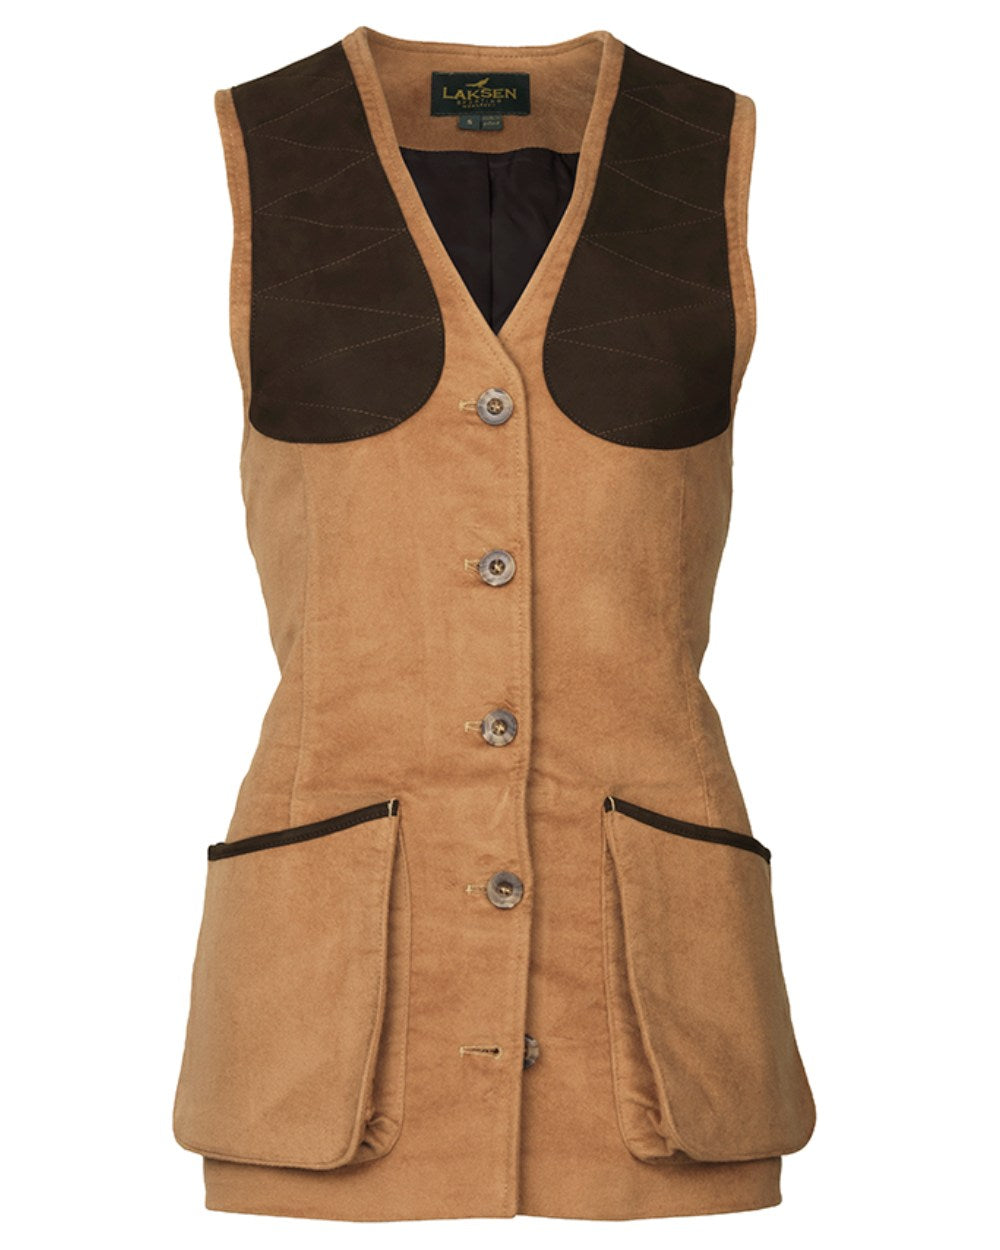 Camel Coloured Laksen Lady Belgravia Beauly Shooting Vest On A White Background 